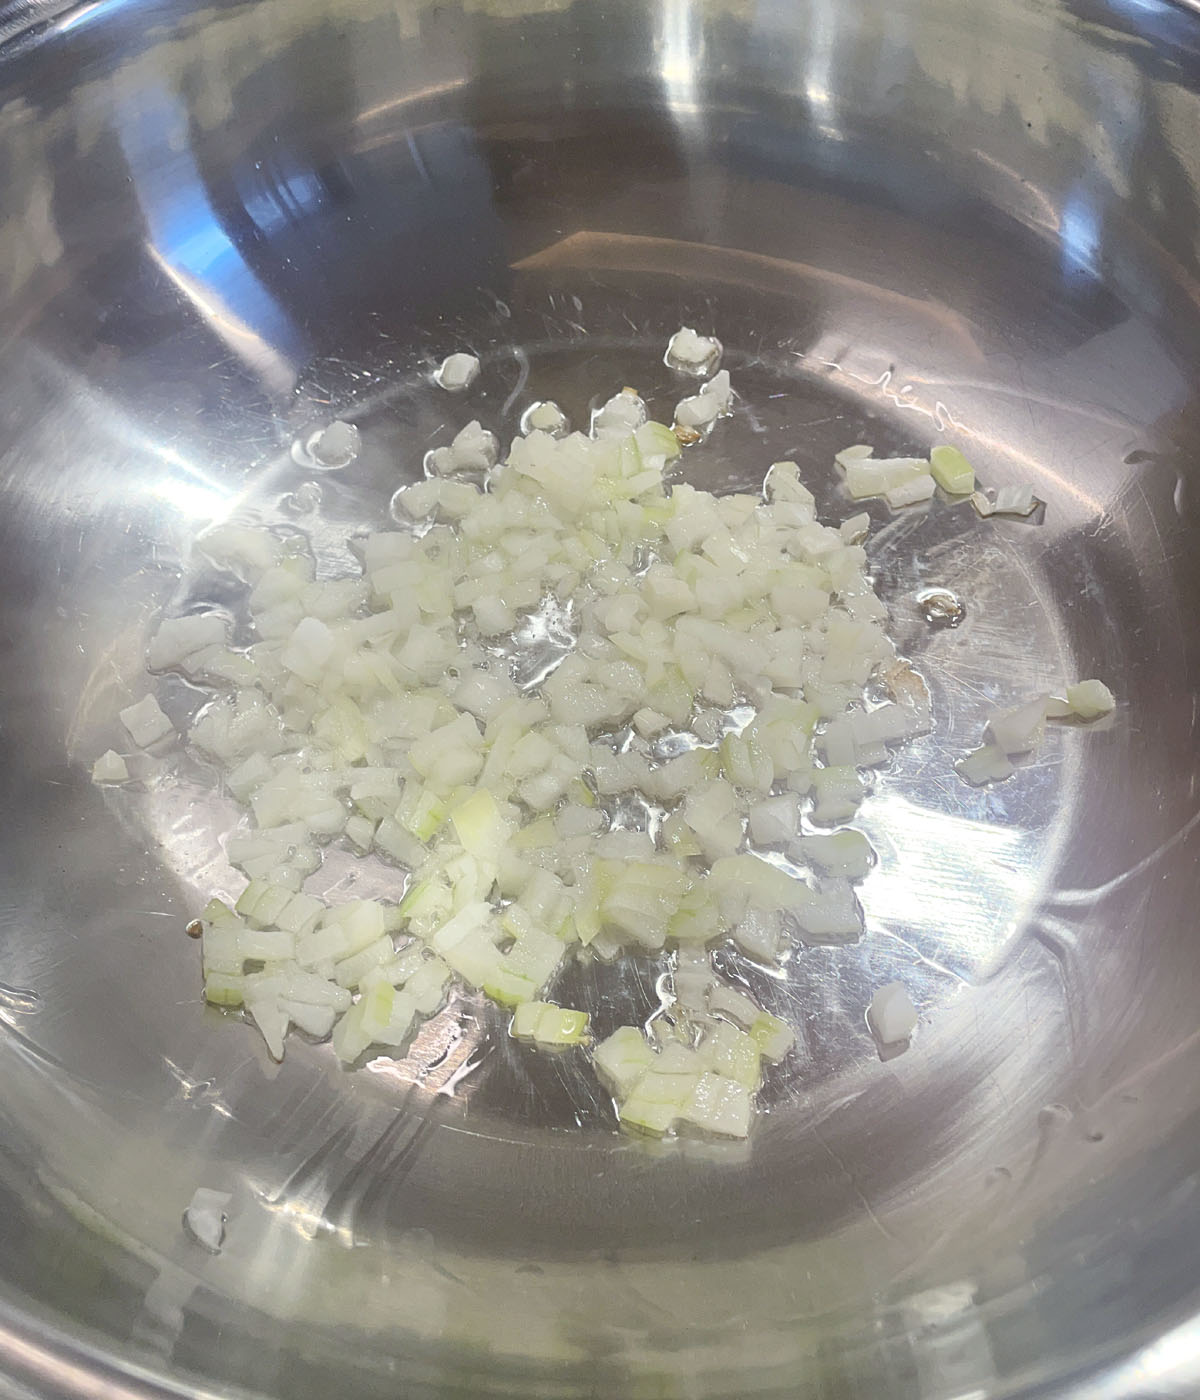 Diced onions frying in a metal pan.